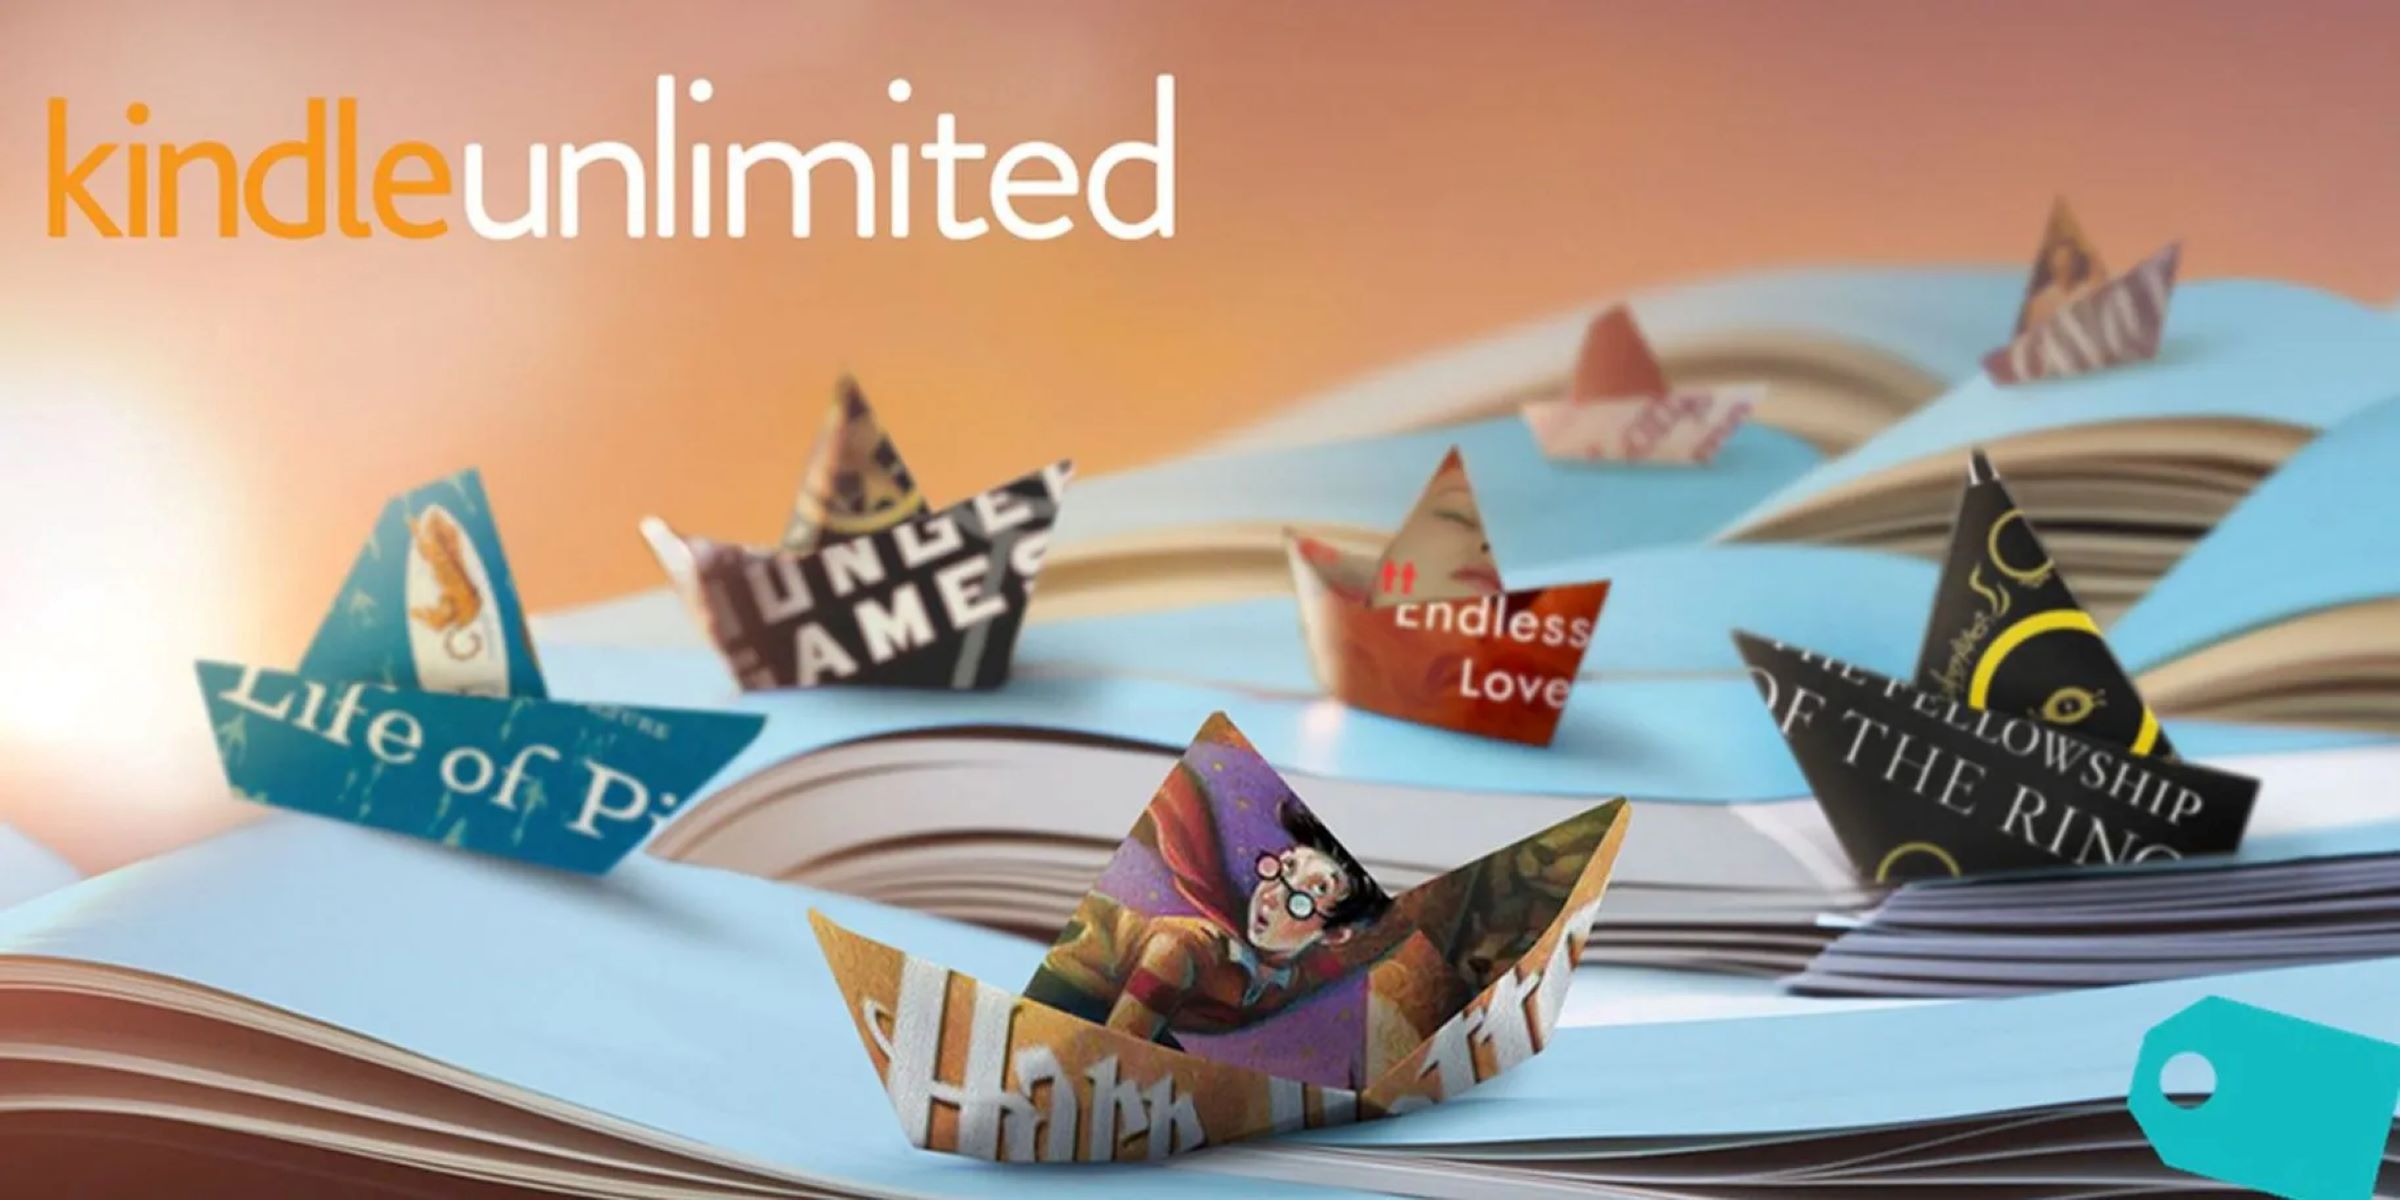 How To Buy Kindle Unlimited As A Gift